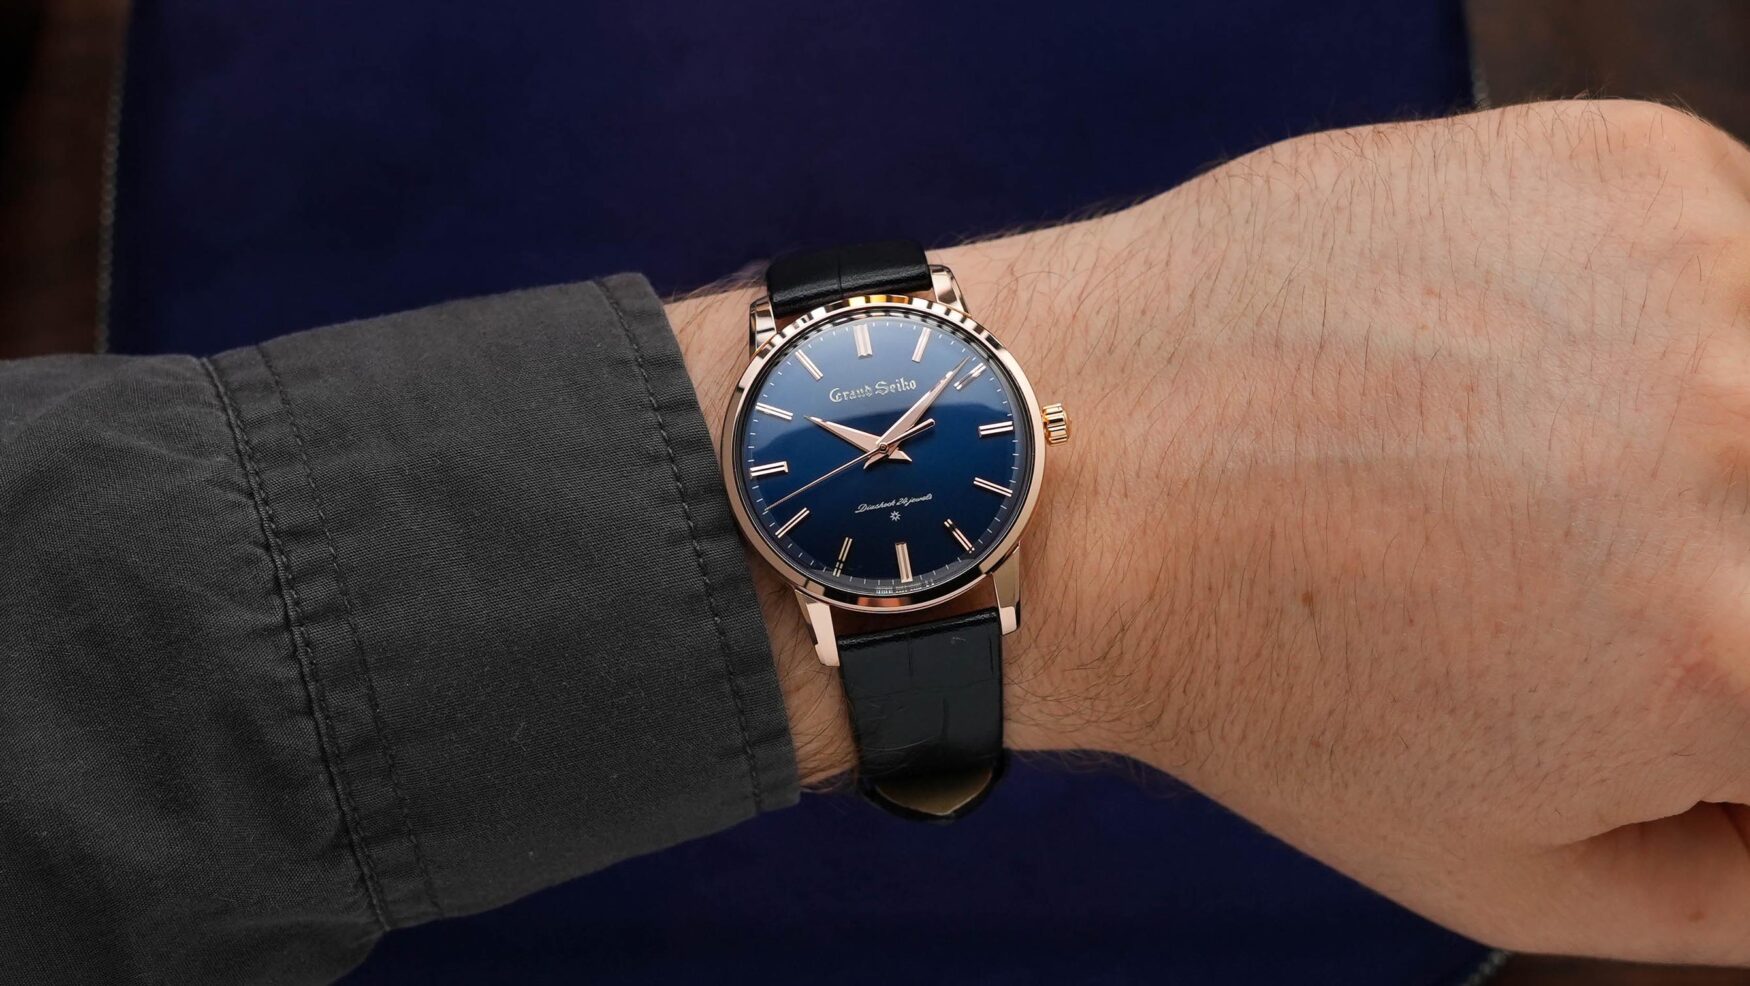 The Grand Seiko Starry Night SBGW314 puts some sparkle in their history